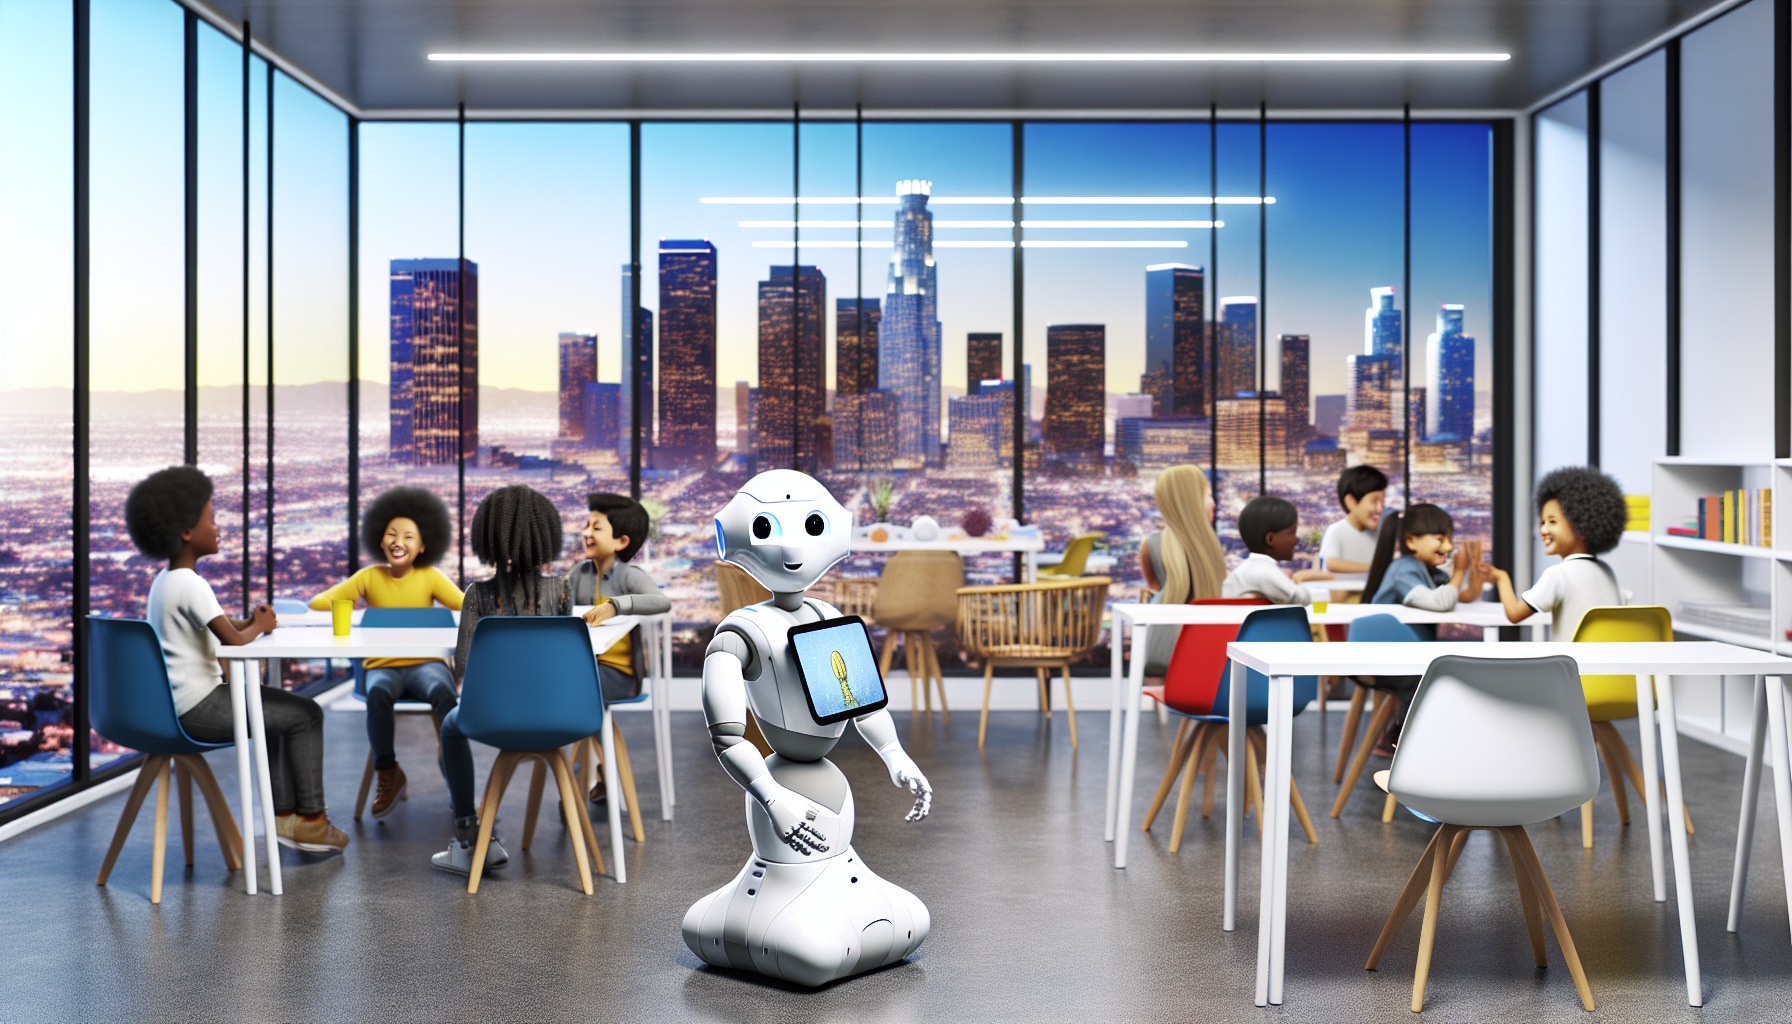 A look into the future of meme therapy with Pepper Robot in a Los Angeles classroom